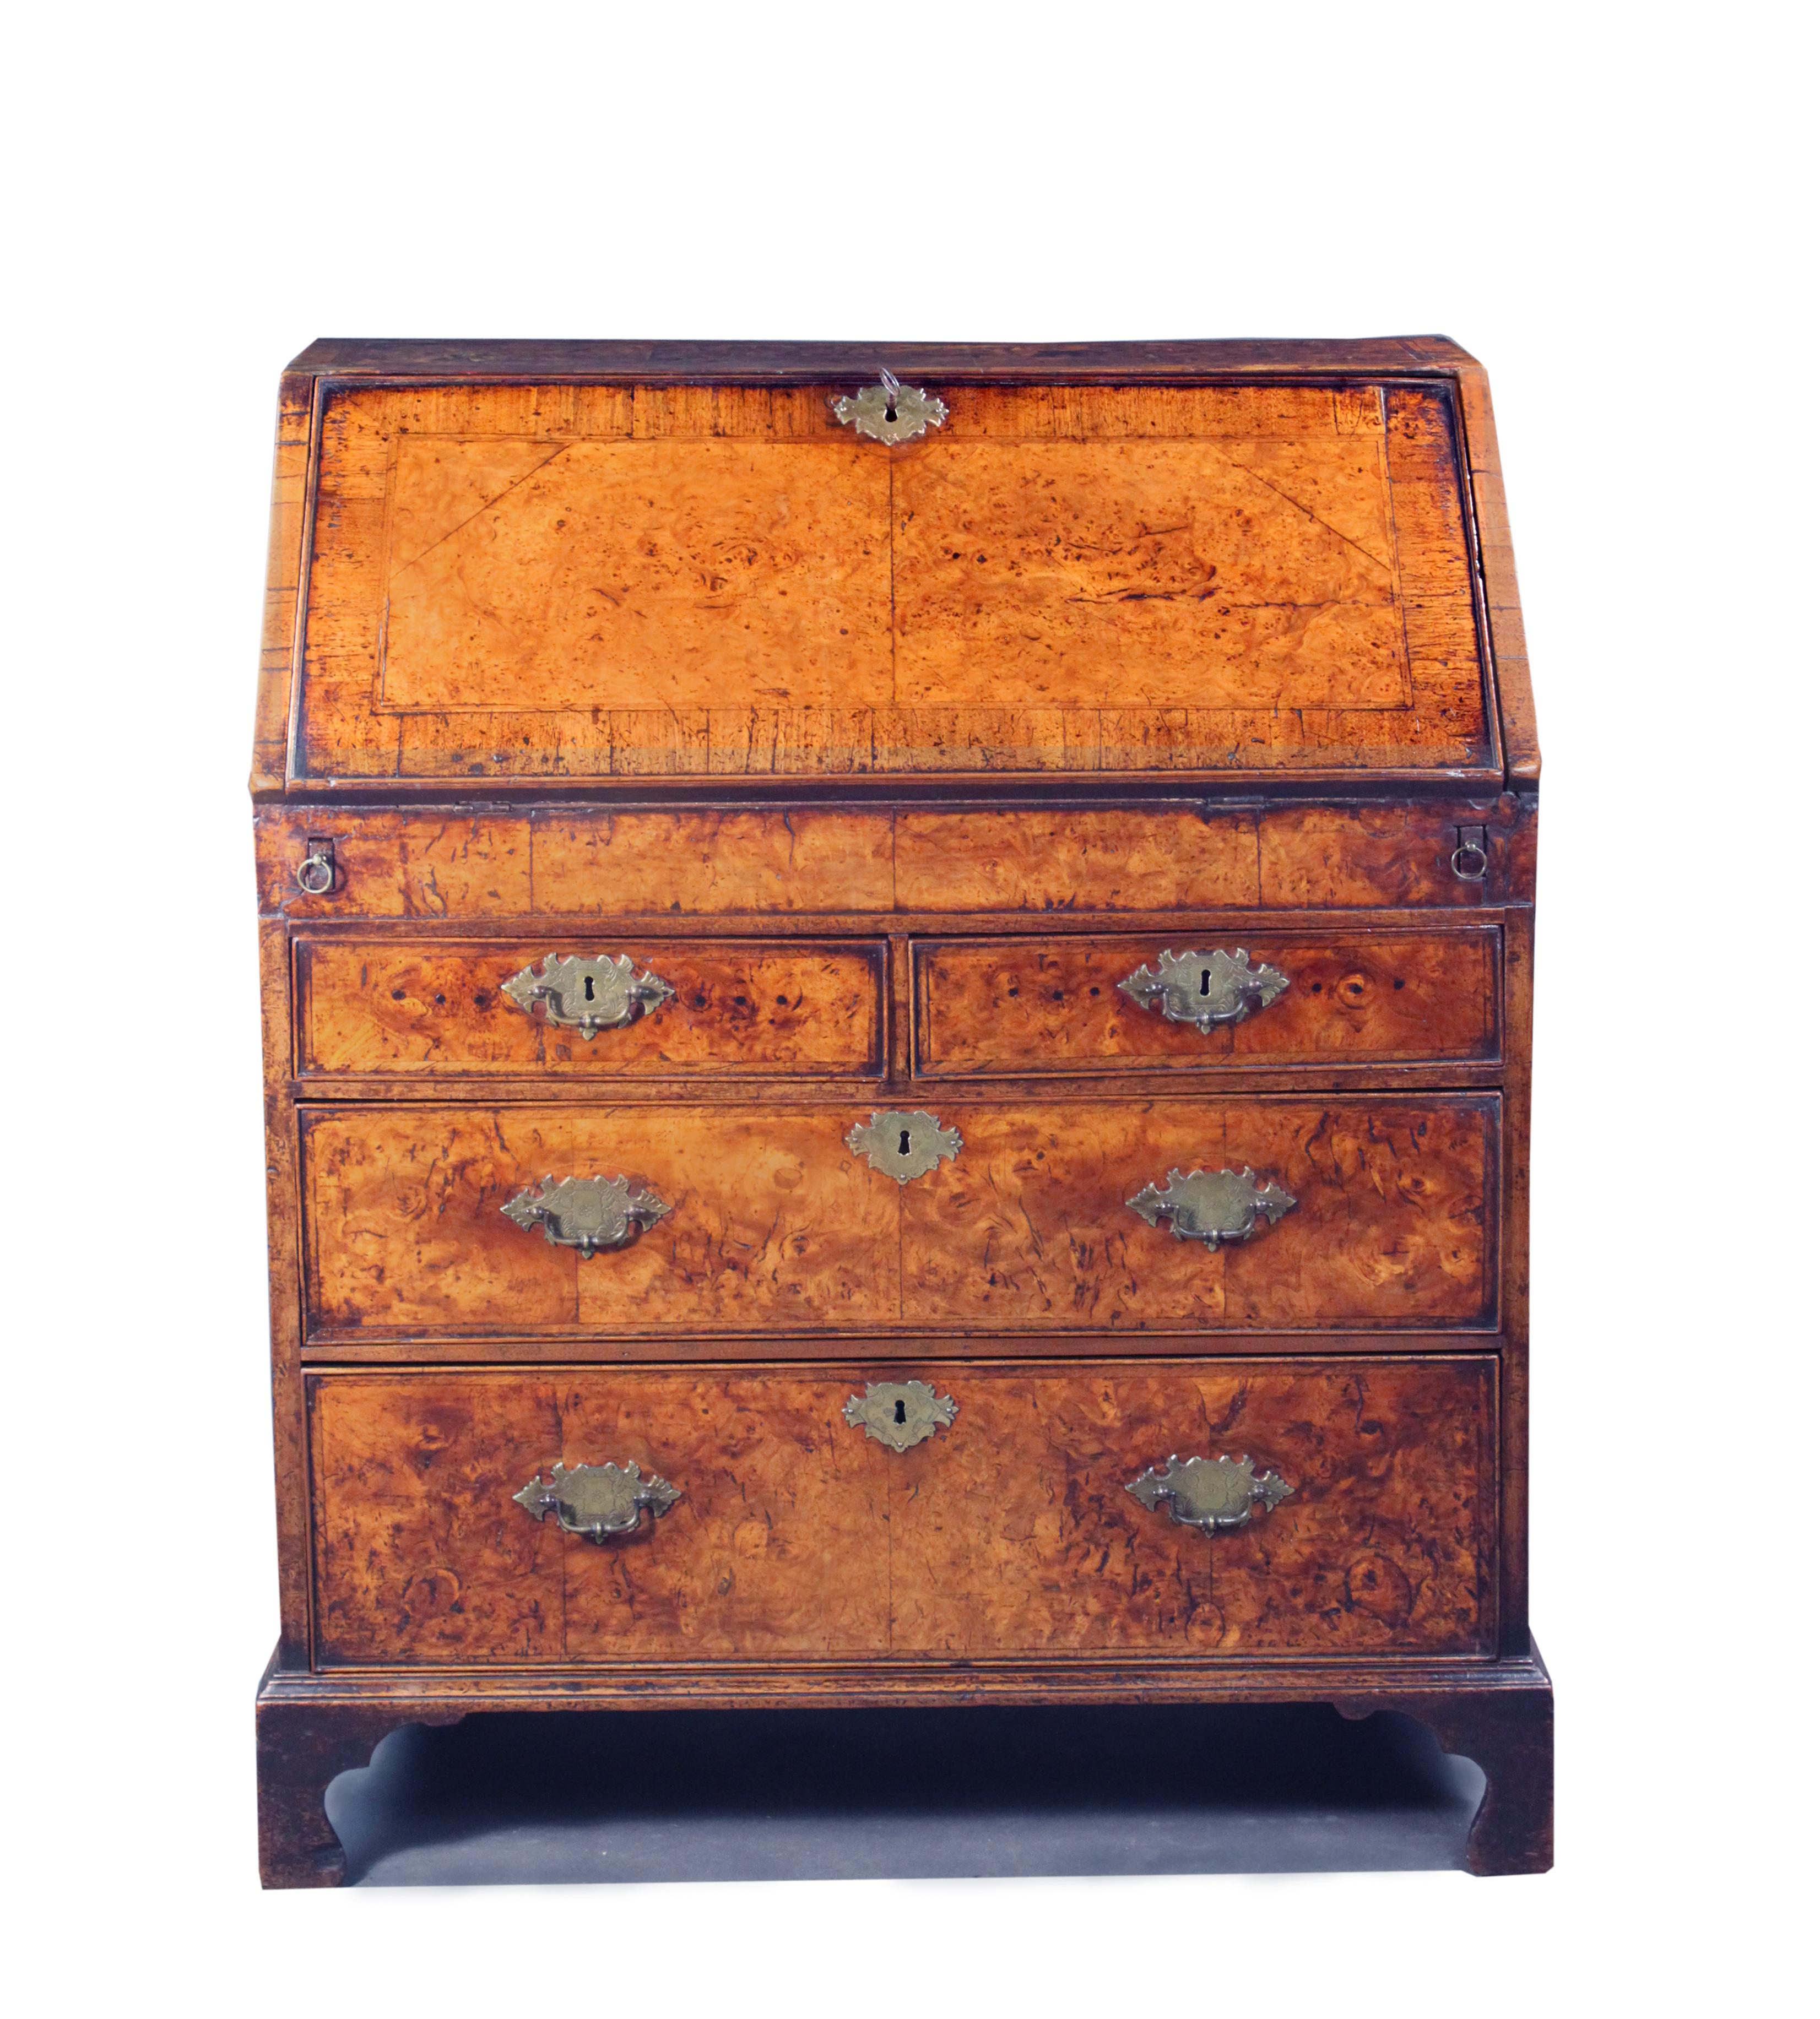 An early 18th century burr ash veneered bureau with a well and stepped interior. The drawers, fall and top have cross-grained and herring bone banding and matched veneers.
The colour and patina is exceptional. The bureau is made in exactly the same